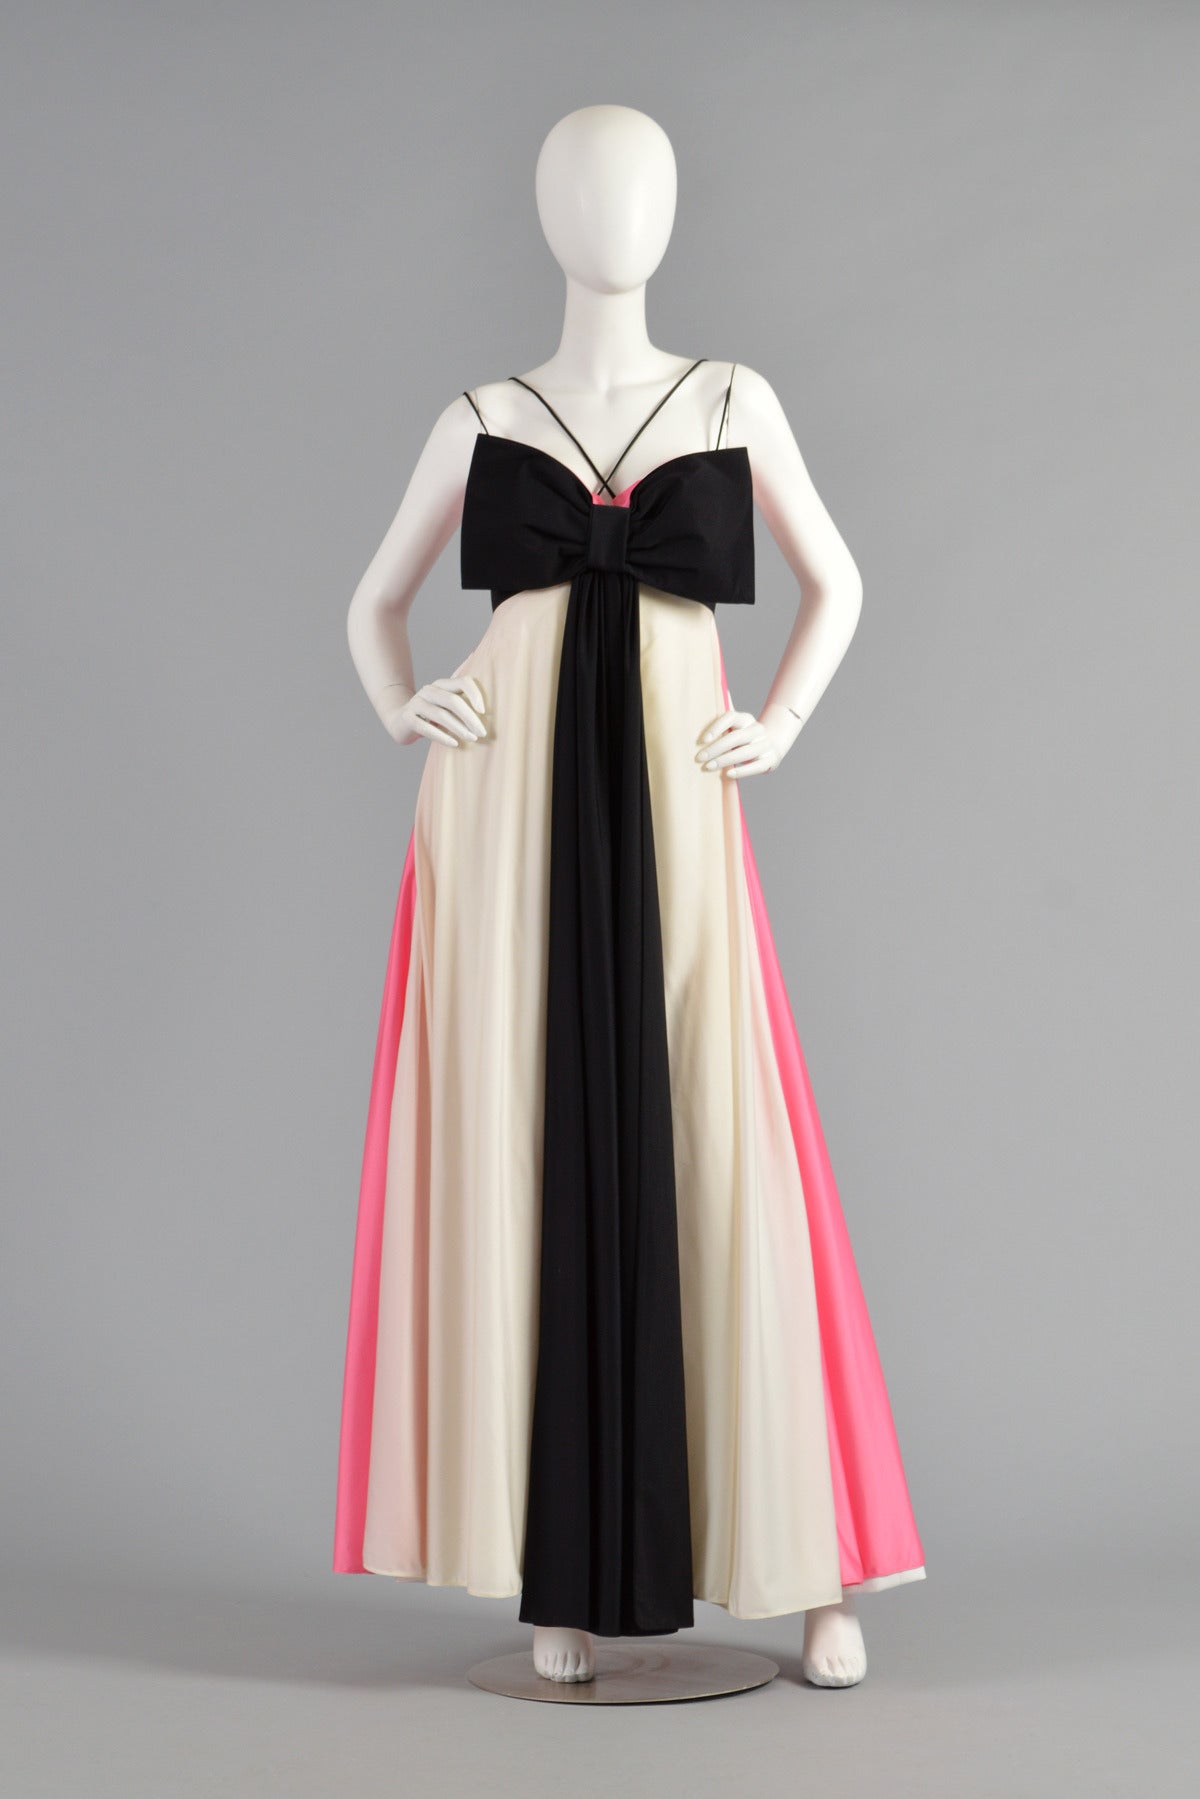 Incredible vintage 1970s pink, black + white maxi dress by Les Wilk. Truly a unique + stunning gem. Pink + white vertically striped maxi gown features a huge full sweep. The empire waist bodice features the most massive black bow tie front with long